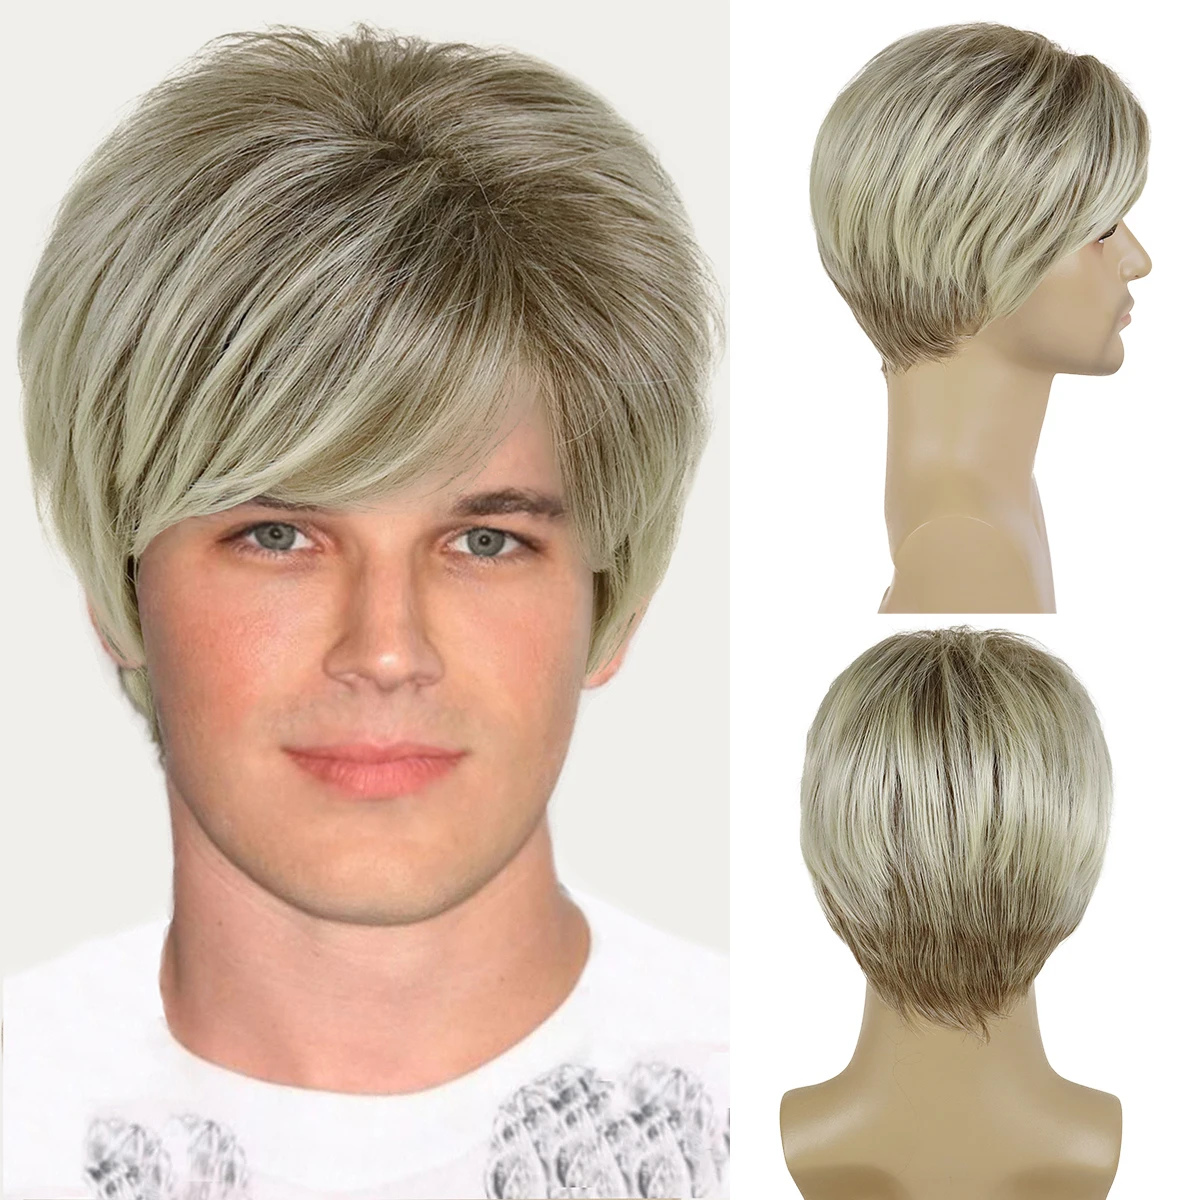 

GNIMEGIL Synthetic Blonde Ombre Wig with Dark Roots Natural Layered Cut Wig with Bangs Short Straight Wig for Man Heat Resistant